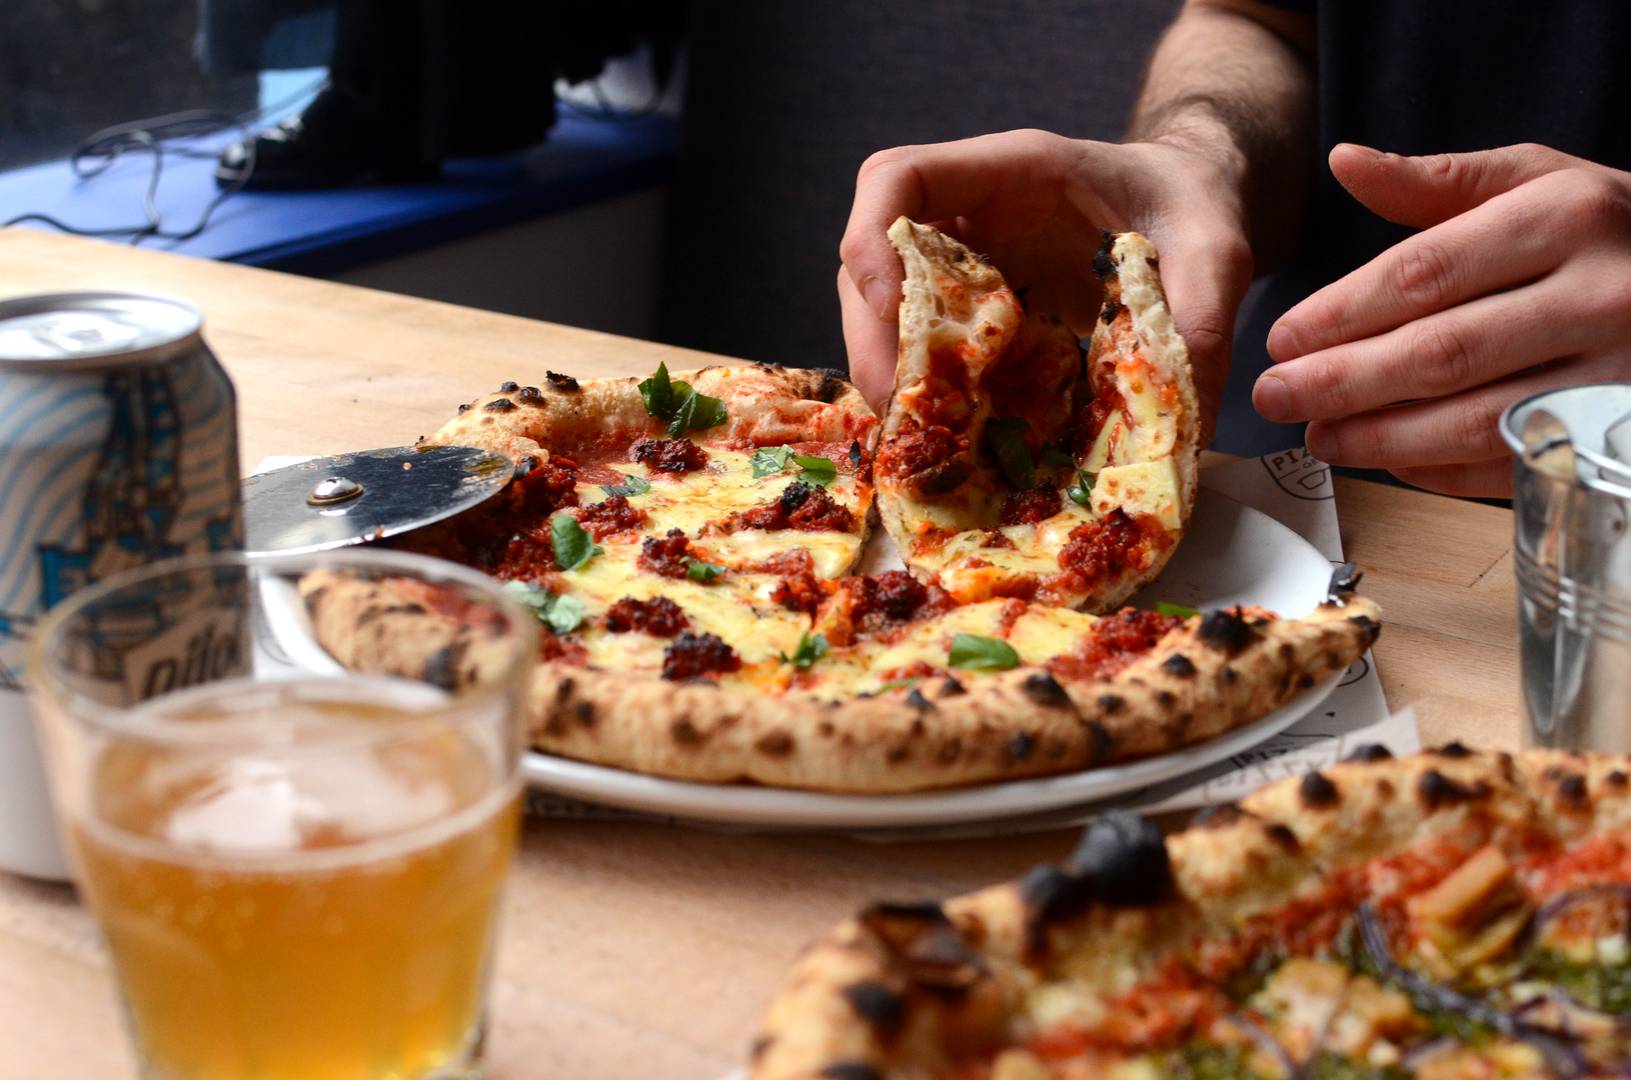 A close up of a mans hand taking a slice of pizza from a plate, there is also a can and glass of beer on the table., Pizza Geeks.